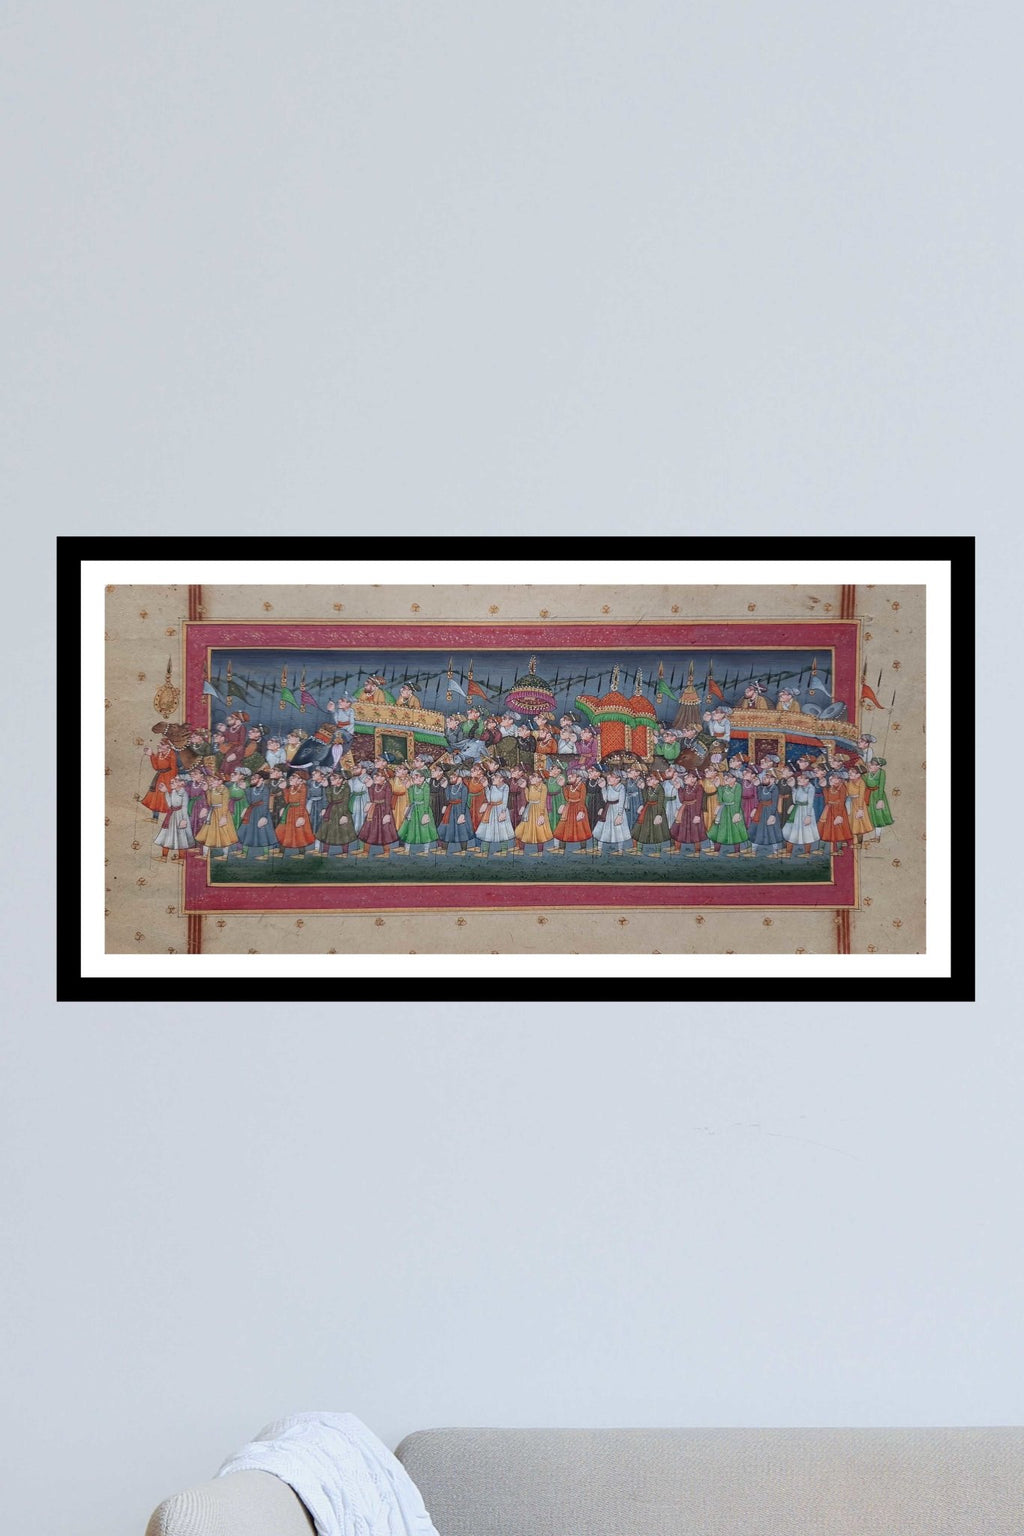 The Procession Miniature painting